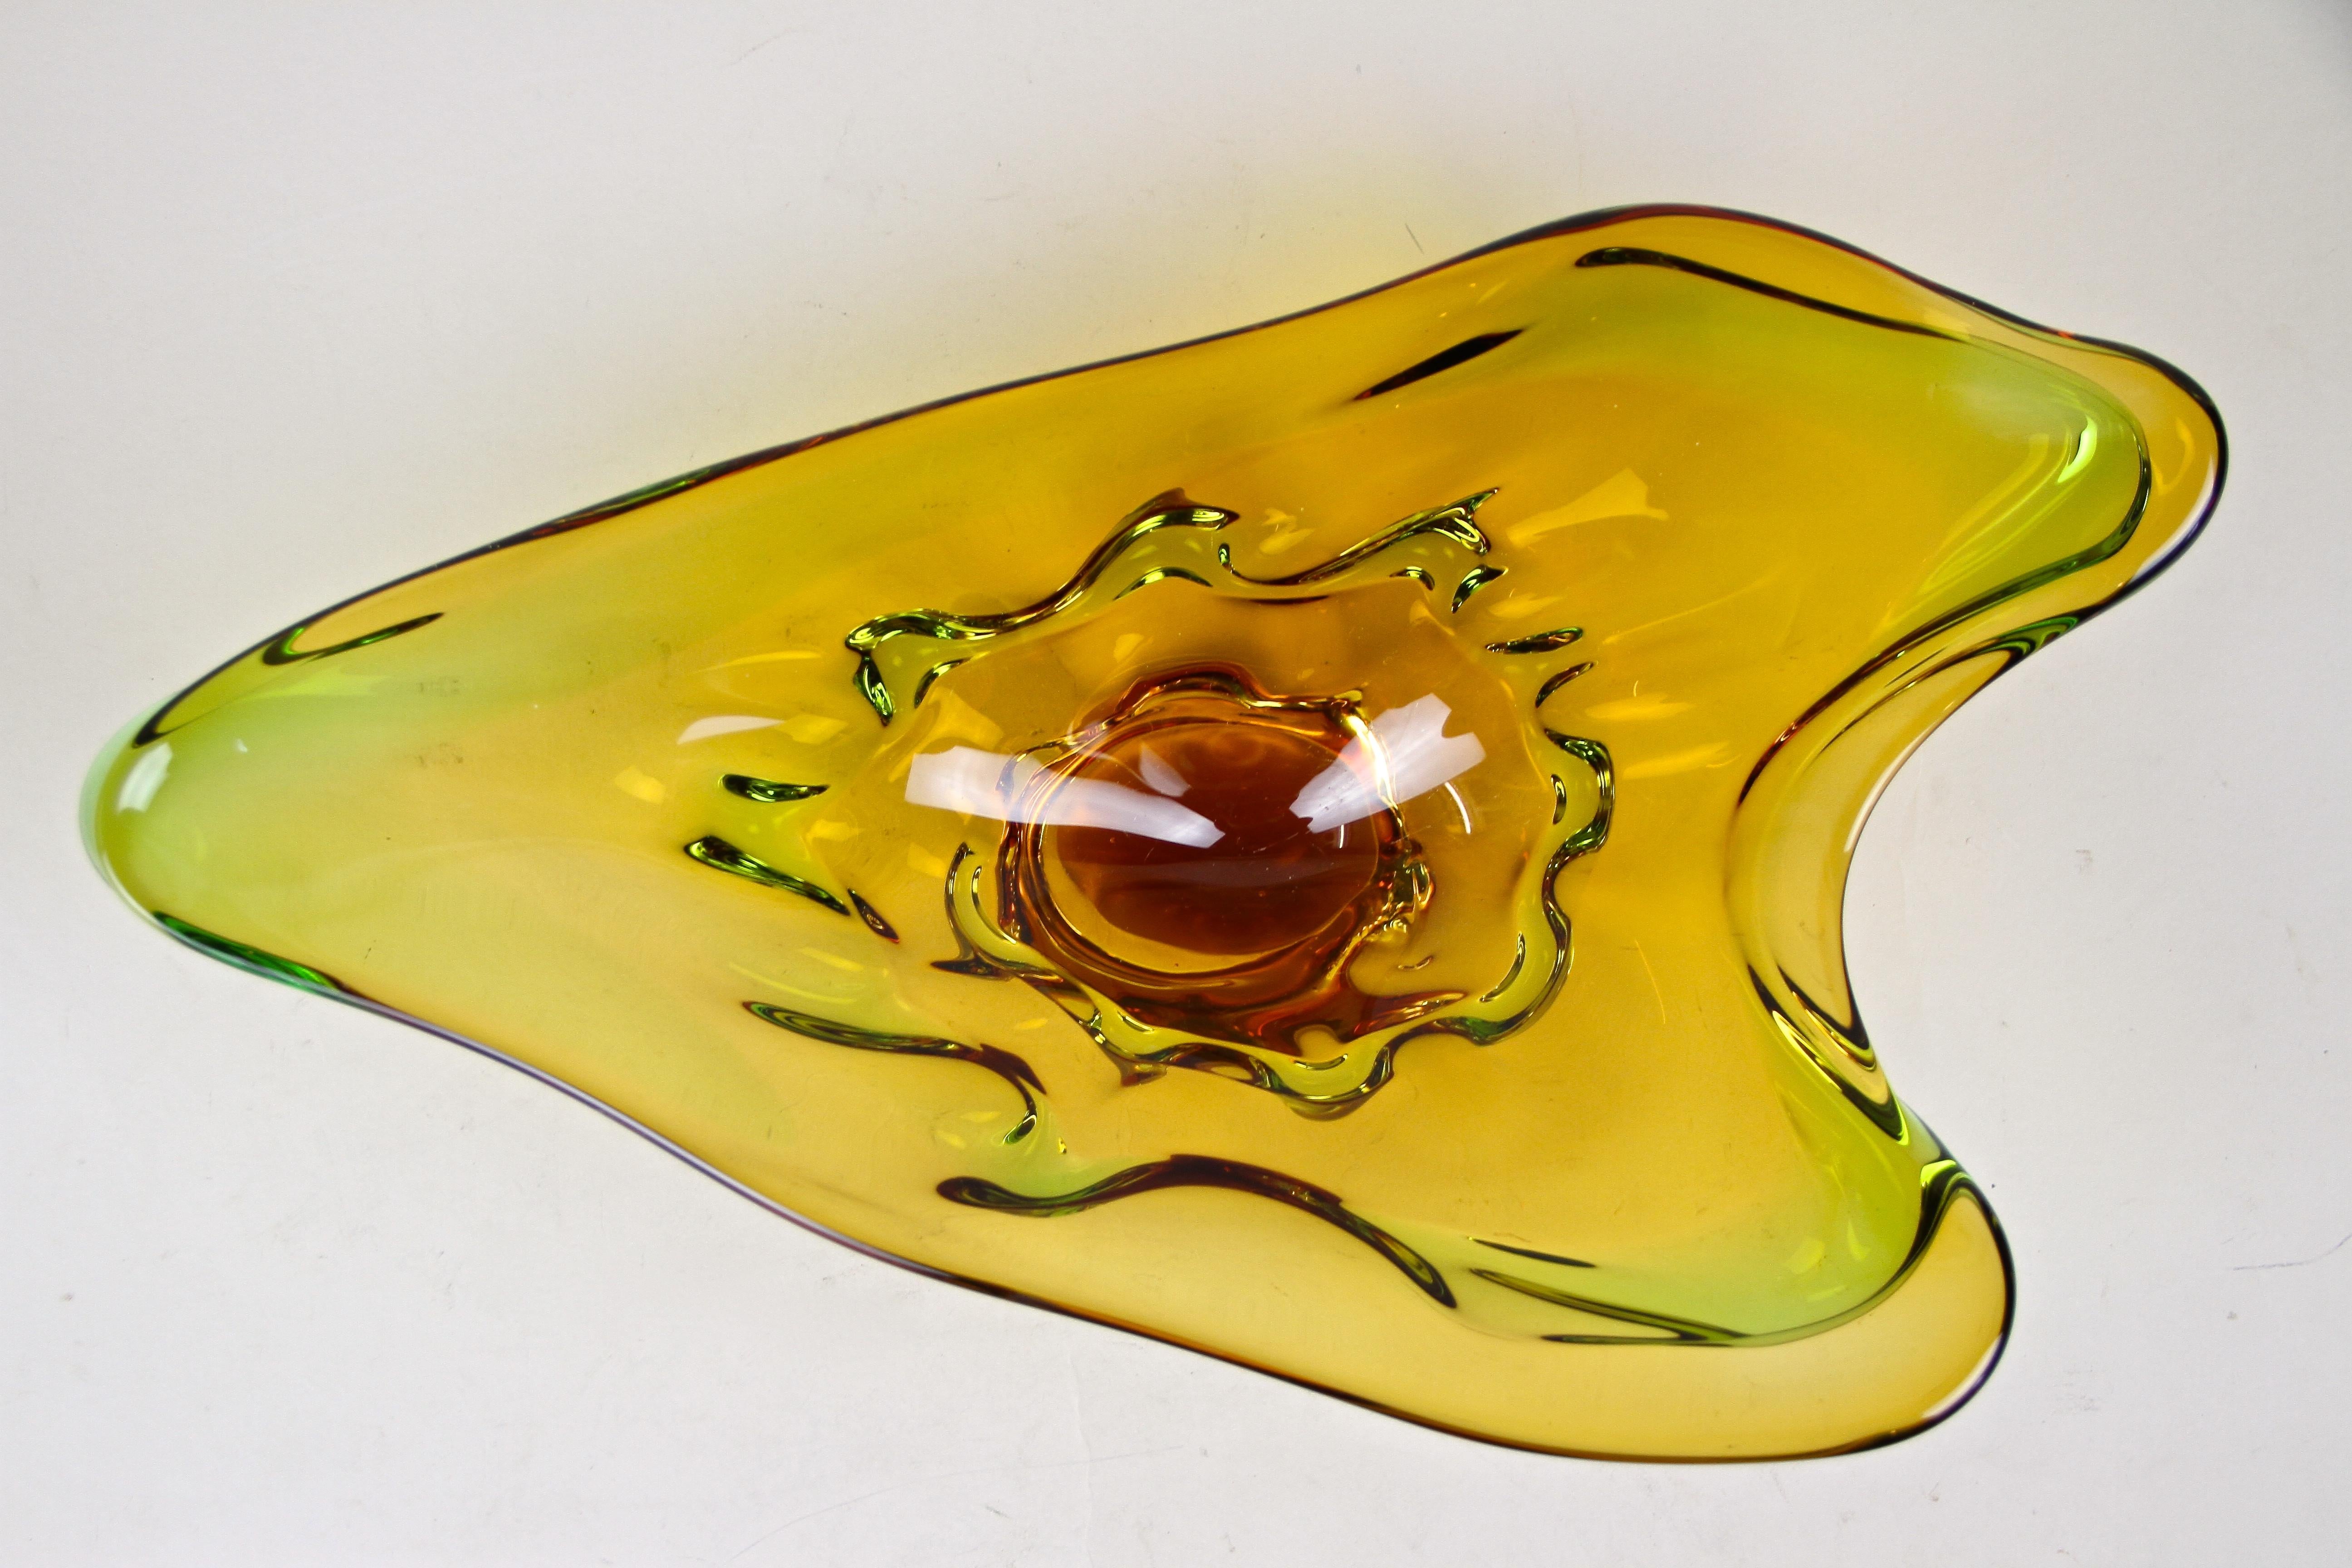 Exceptional murano glass bowl out of the famous workshops in Italy from the era around 1960/70. Colored in beautiful amber and green tones, this large, unusual shaped glass bowl impresses with its amazing design. The highly decorative murano bowl